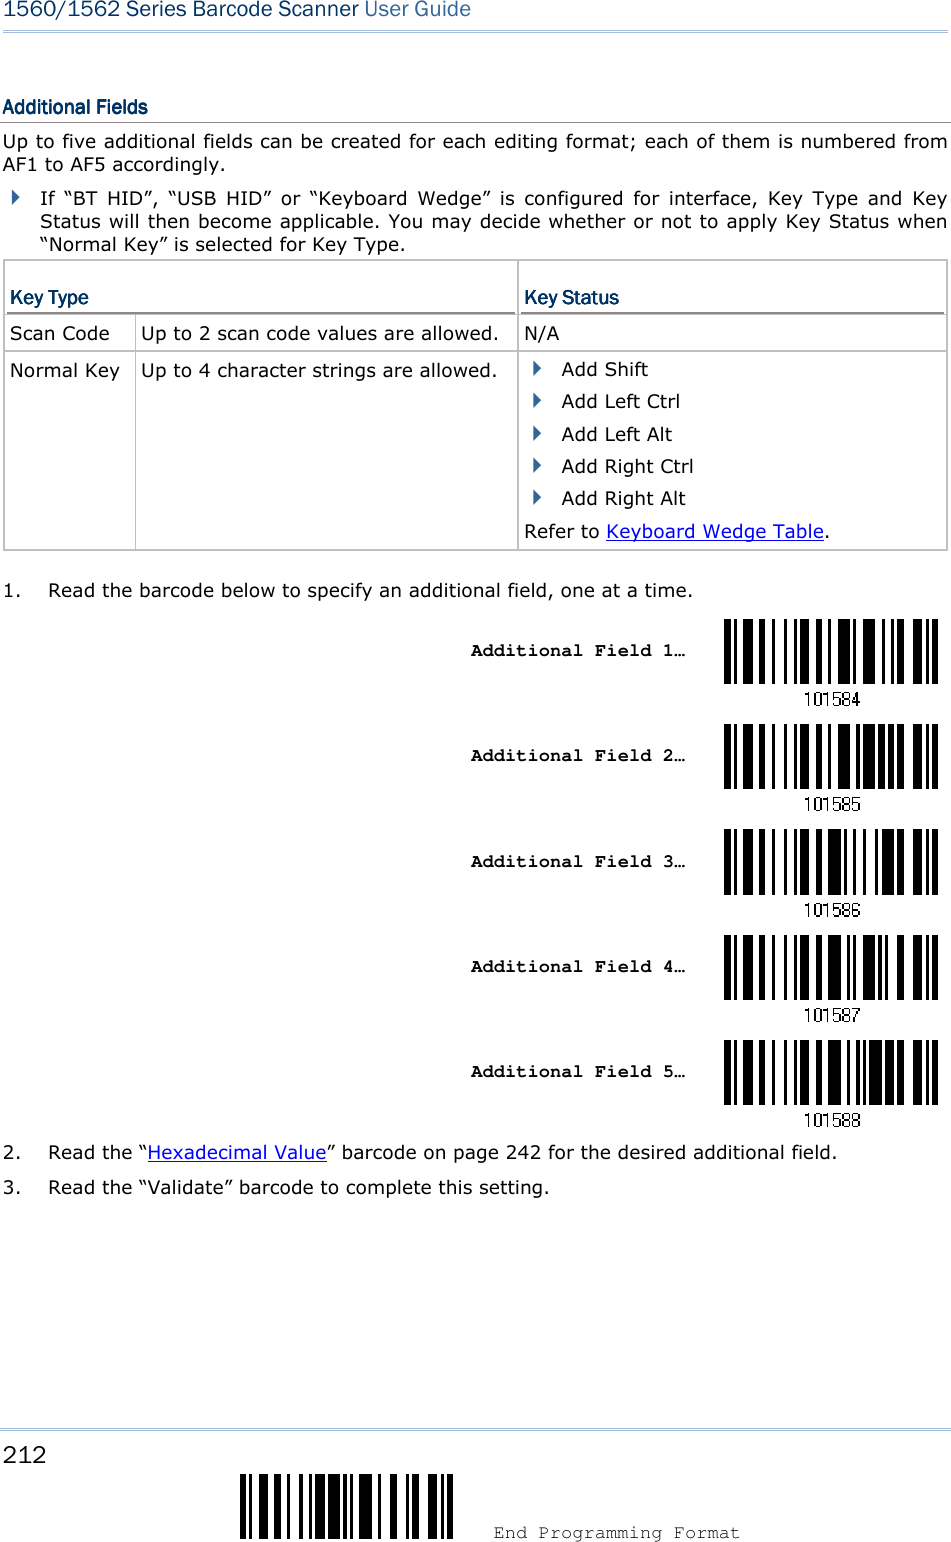 212  End Programming Format 1560/1562 Series Barcode Scanner User Guide  Additional FieldsAdditional FieldsAdditional FieldsAdditional Fields    Up to five additional fields can be created for each editing format; each of them is numbered from AF1 to AF5 accordingly.  If  “BT  HID”,  “USB  HID”  or  “Keyboard  Wedge”  is  configured  for  interface,  Key  Type  and  Key Status will then become applicable. You may decide whether or not to apply Key Status when “Normal Key” is selected for Key Type.   Key TypeKey TypeKey TypeKey Type     Key StatusKey StatusKey StatusKey Status    Scan Code  Up to 2 scan code values are allowed. N/A Normal Key  Up to 4 character strings are allowed.  Add Shift  Add Left Ctrl  Add Left Alt  Add Right Ctrl  Add Right Alt Refer to Keyboard Wedge Table.   1. Read the barcode below to specify an additional field, one at a time.    Additional Field 1…     Additional Field 2…     Additional Field 3…     Additional Field 4…     Additional Field 5…  2. Read the “Hexadecimal Value” barcode on page 242 for the desired additional field. 3. Read the “Validate” barcode to complete this setting.    